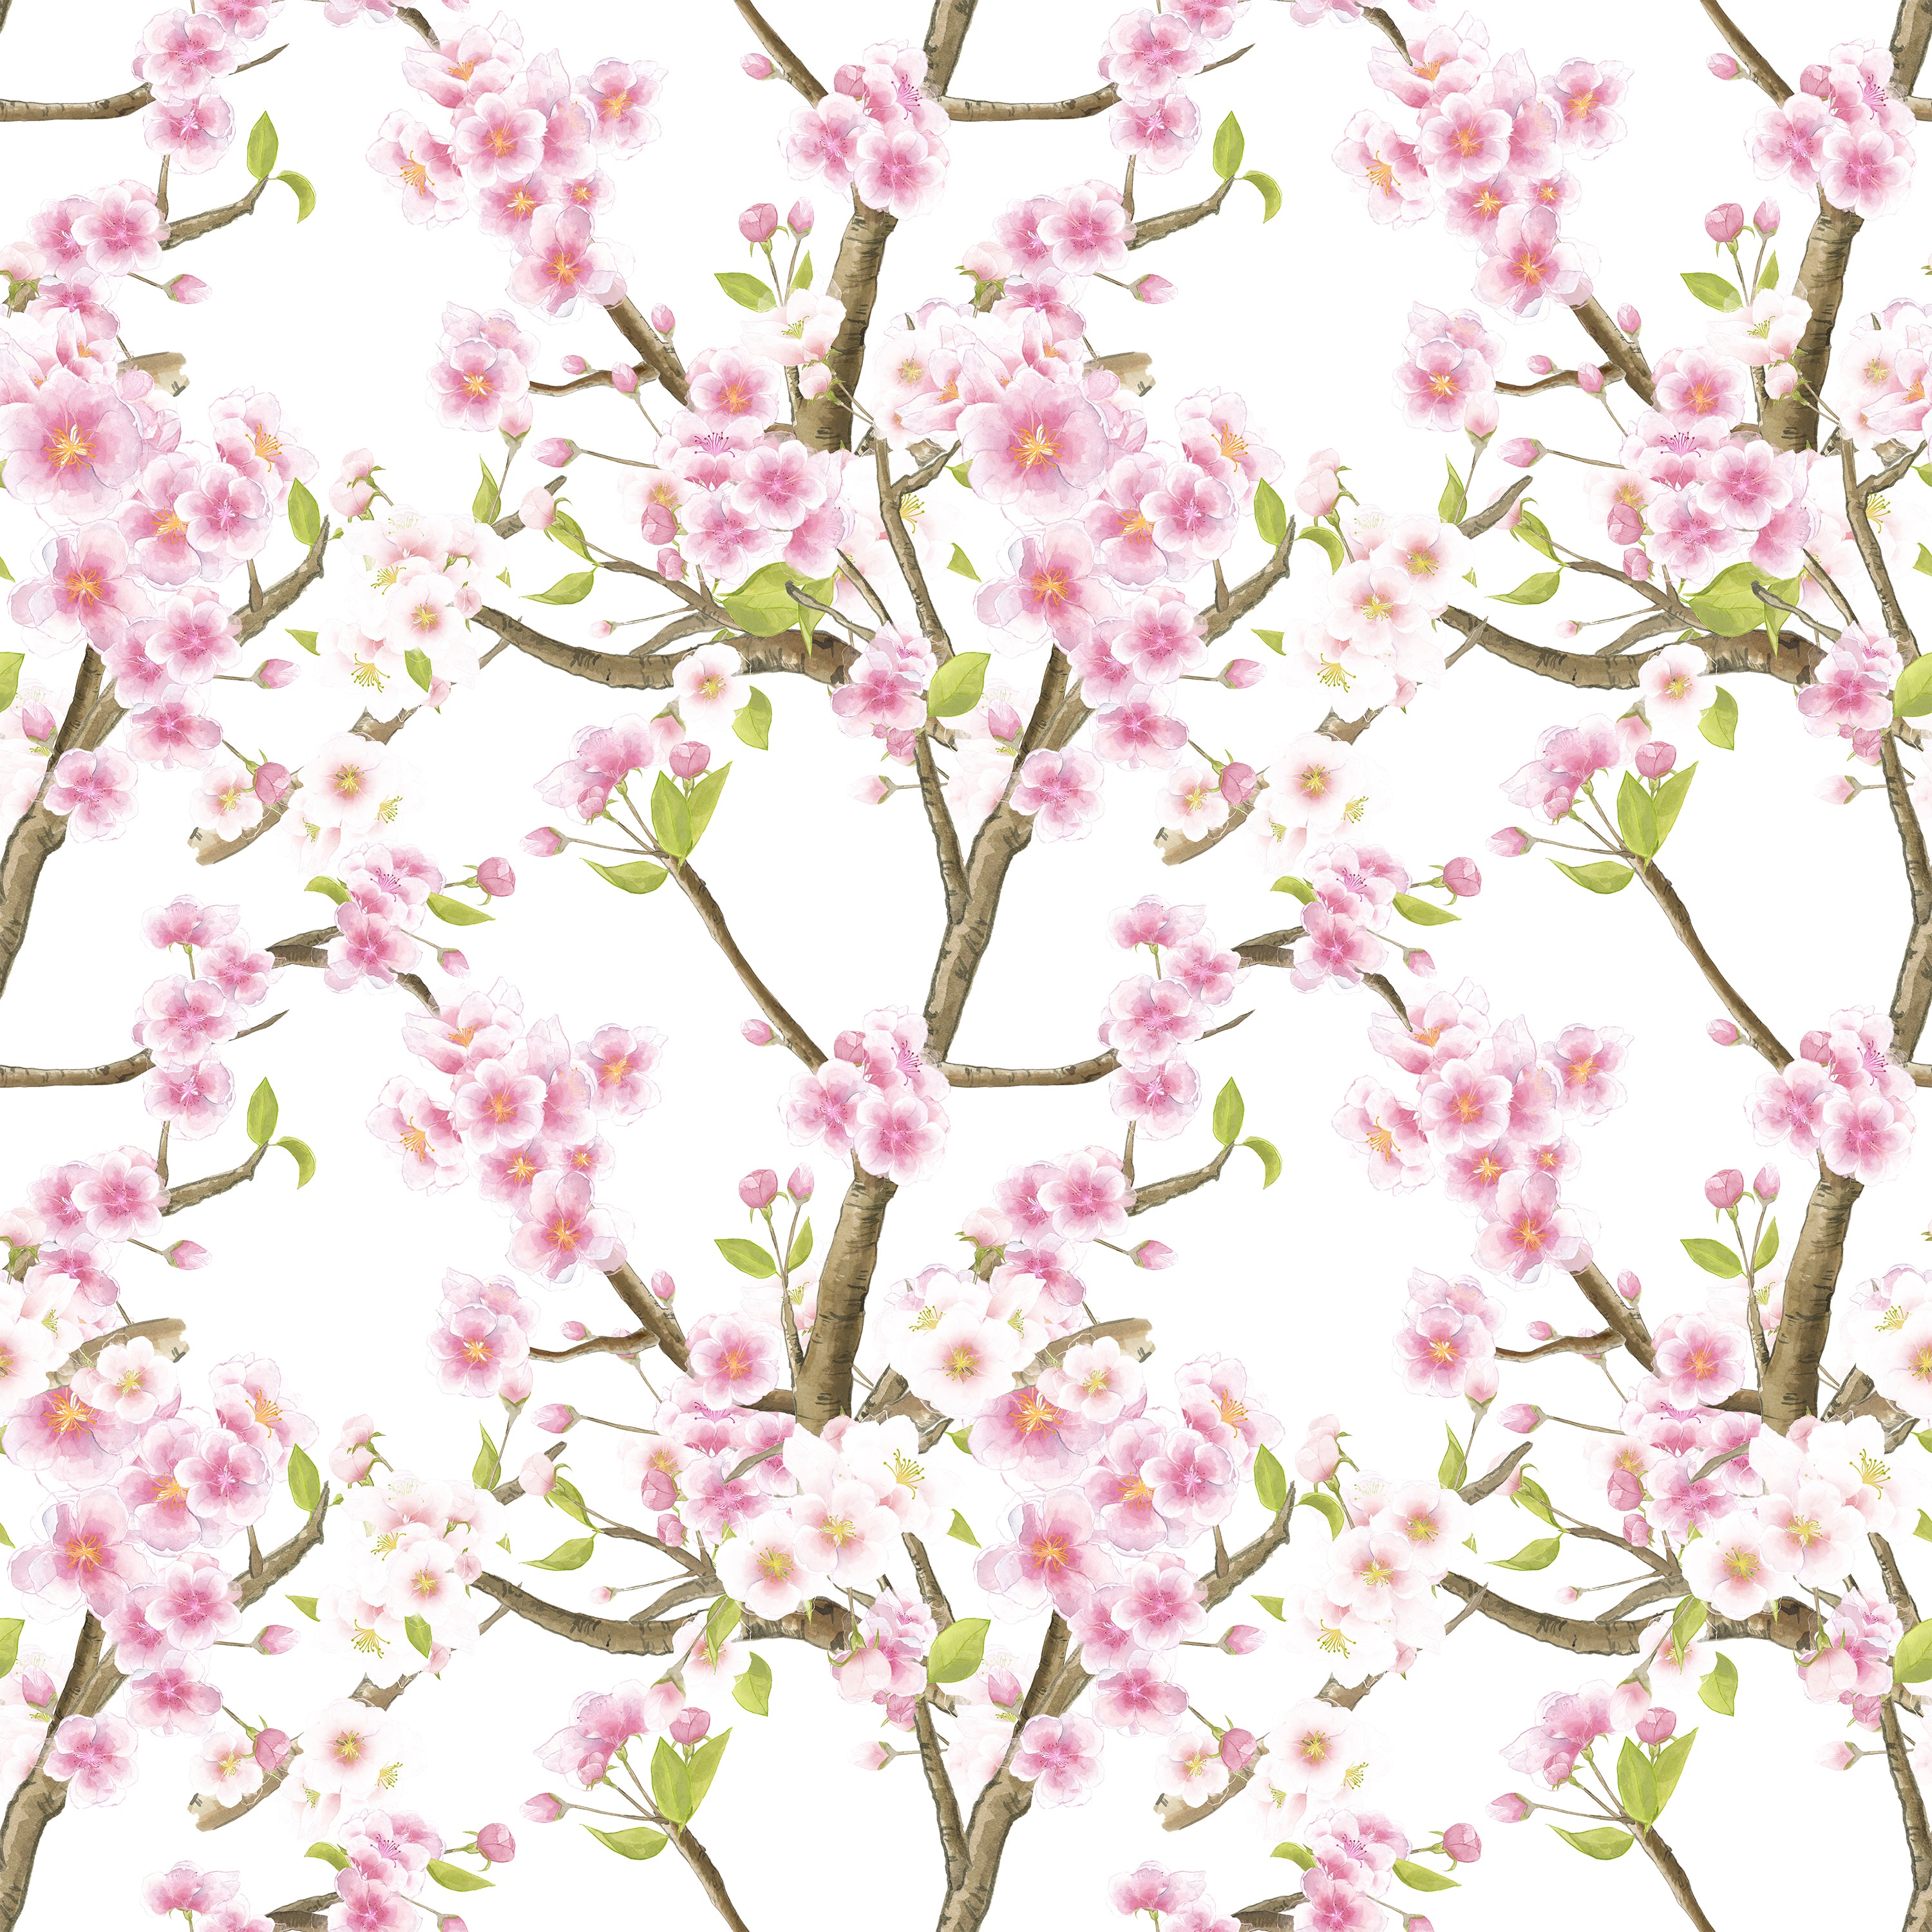 Close-up view of Sakura Blossom Wallpaper featuring intricate branches of sakura blossoms with pink flowers and soft green leaves, set against a crisp white background, capturing the delicate beauty of cherry blossoms